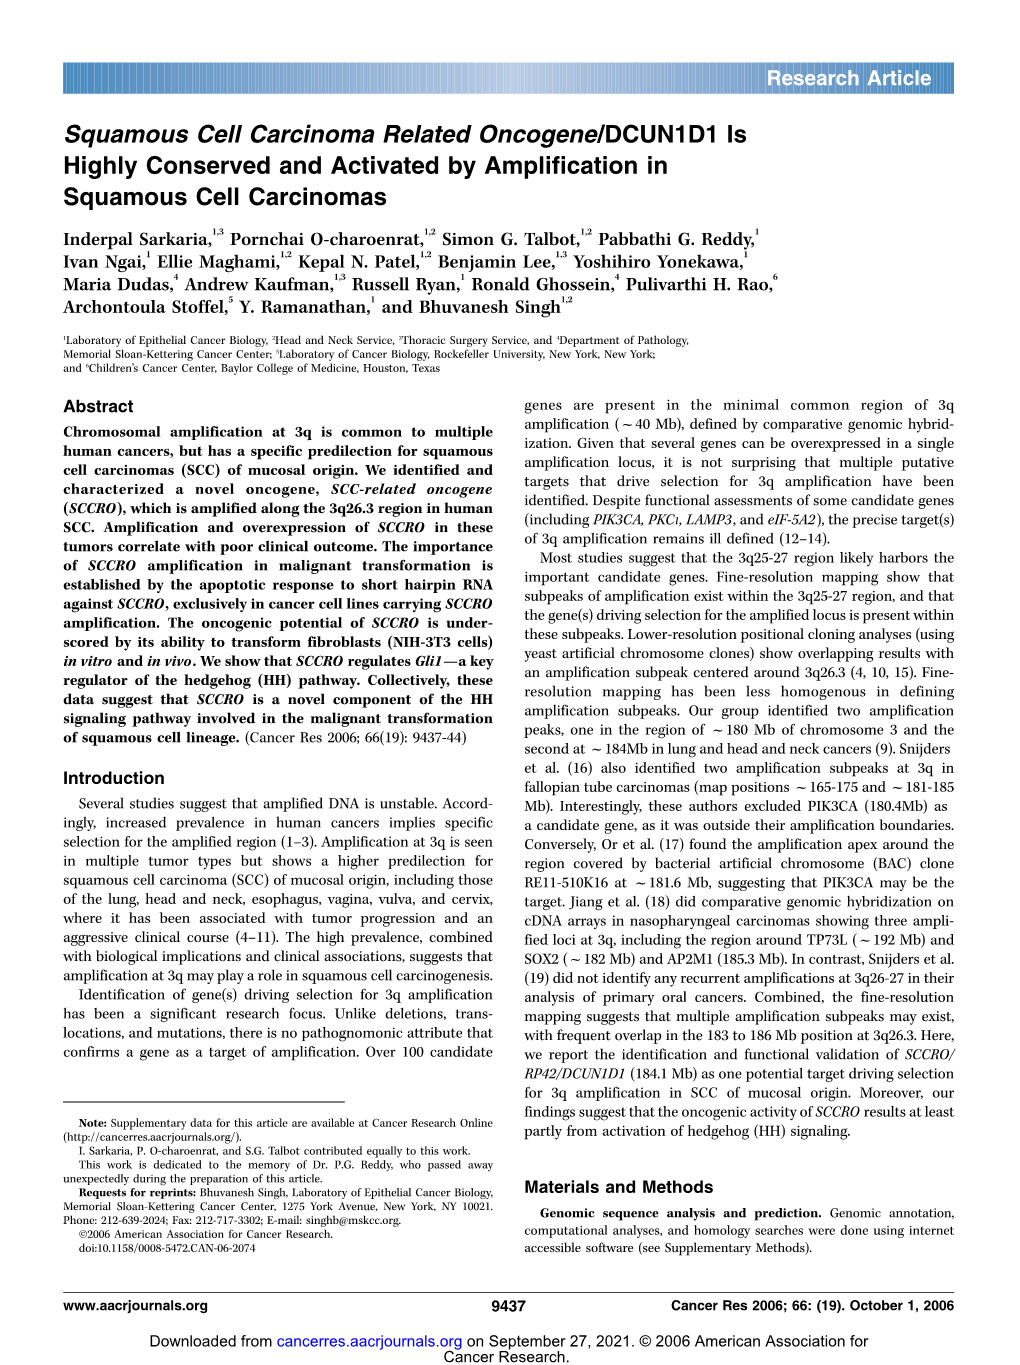 Squamous Cell Carcinoma Related Oncogene/DCUN1D1 Is Highly Conserved and Activated by Amplification in Squamous Cell Carcinomas